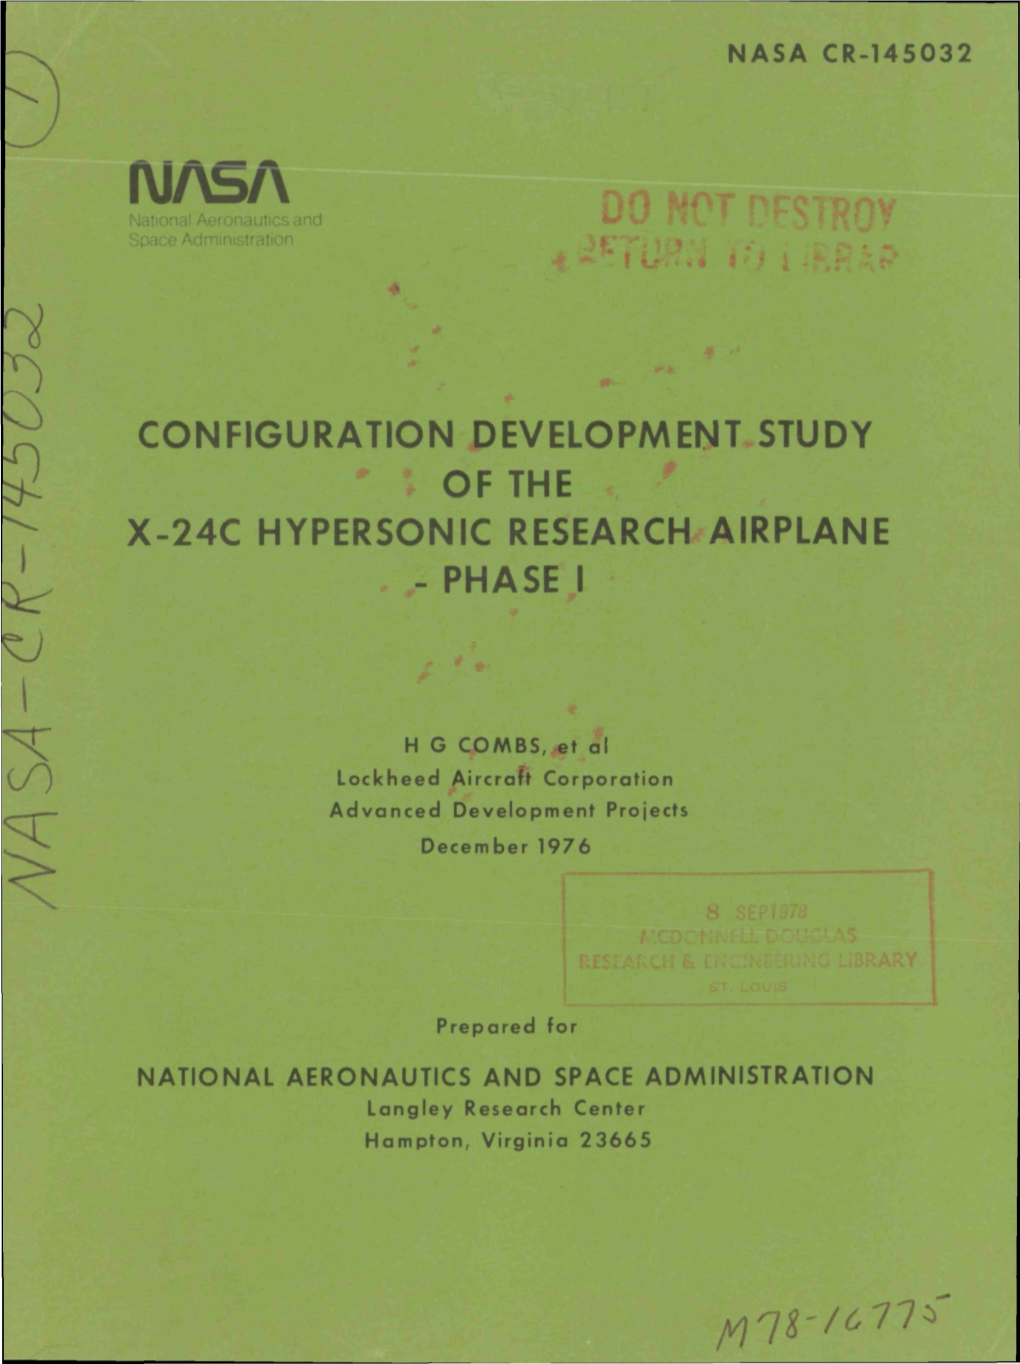 Configuration Development Study of the X-24C Hypersonic Research Airplane - Phase I